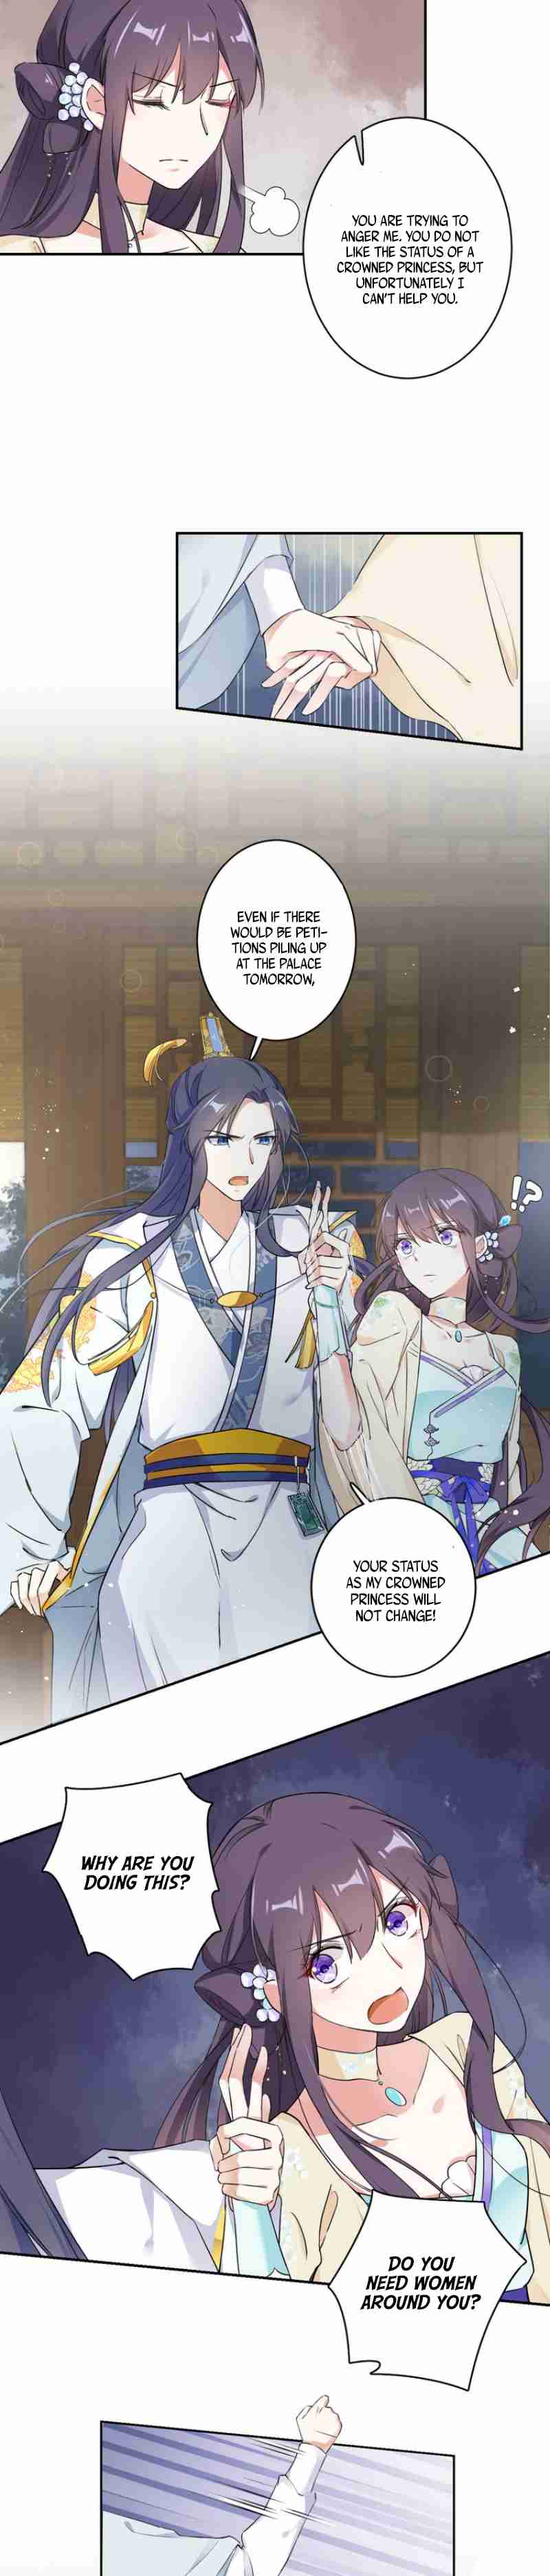 The Story of Hua Yan Ch. 8 How dare you touch the prince’s woman?!